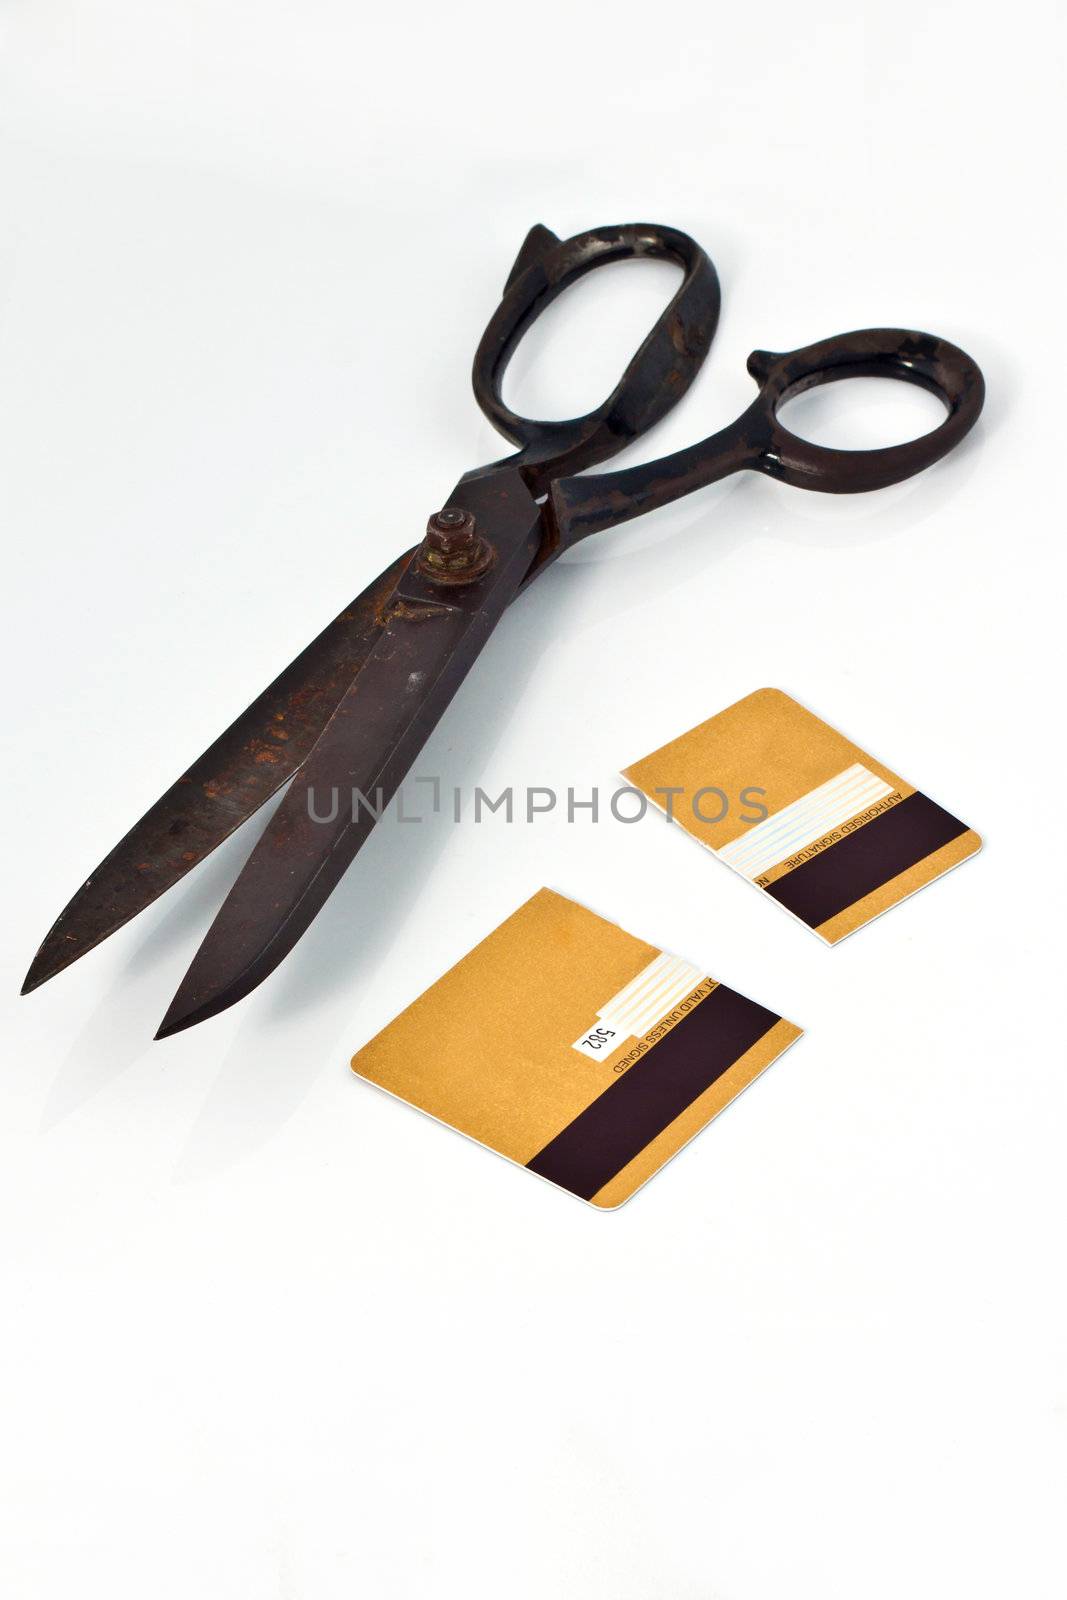 Scissors and cut credit card by Lamarinx